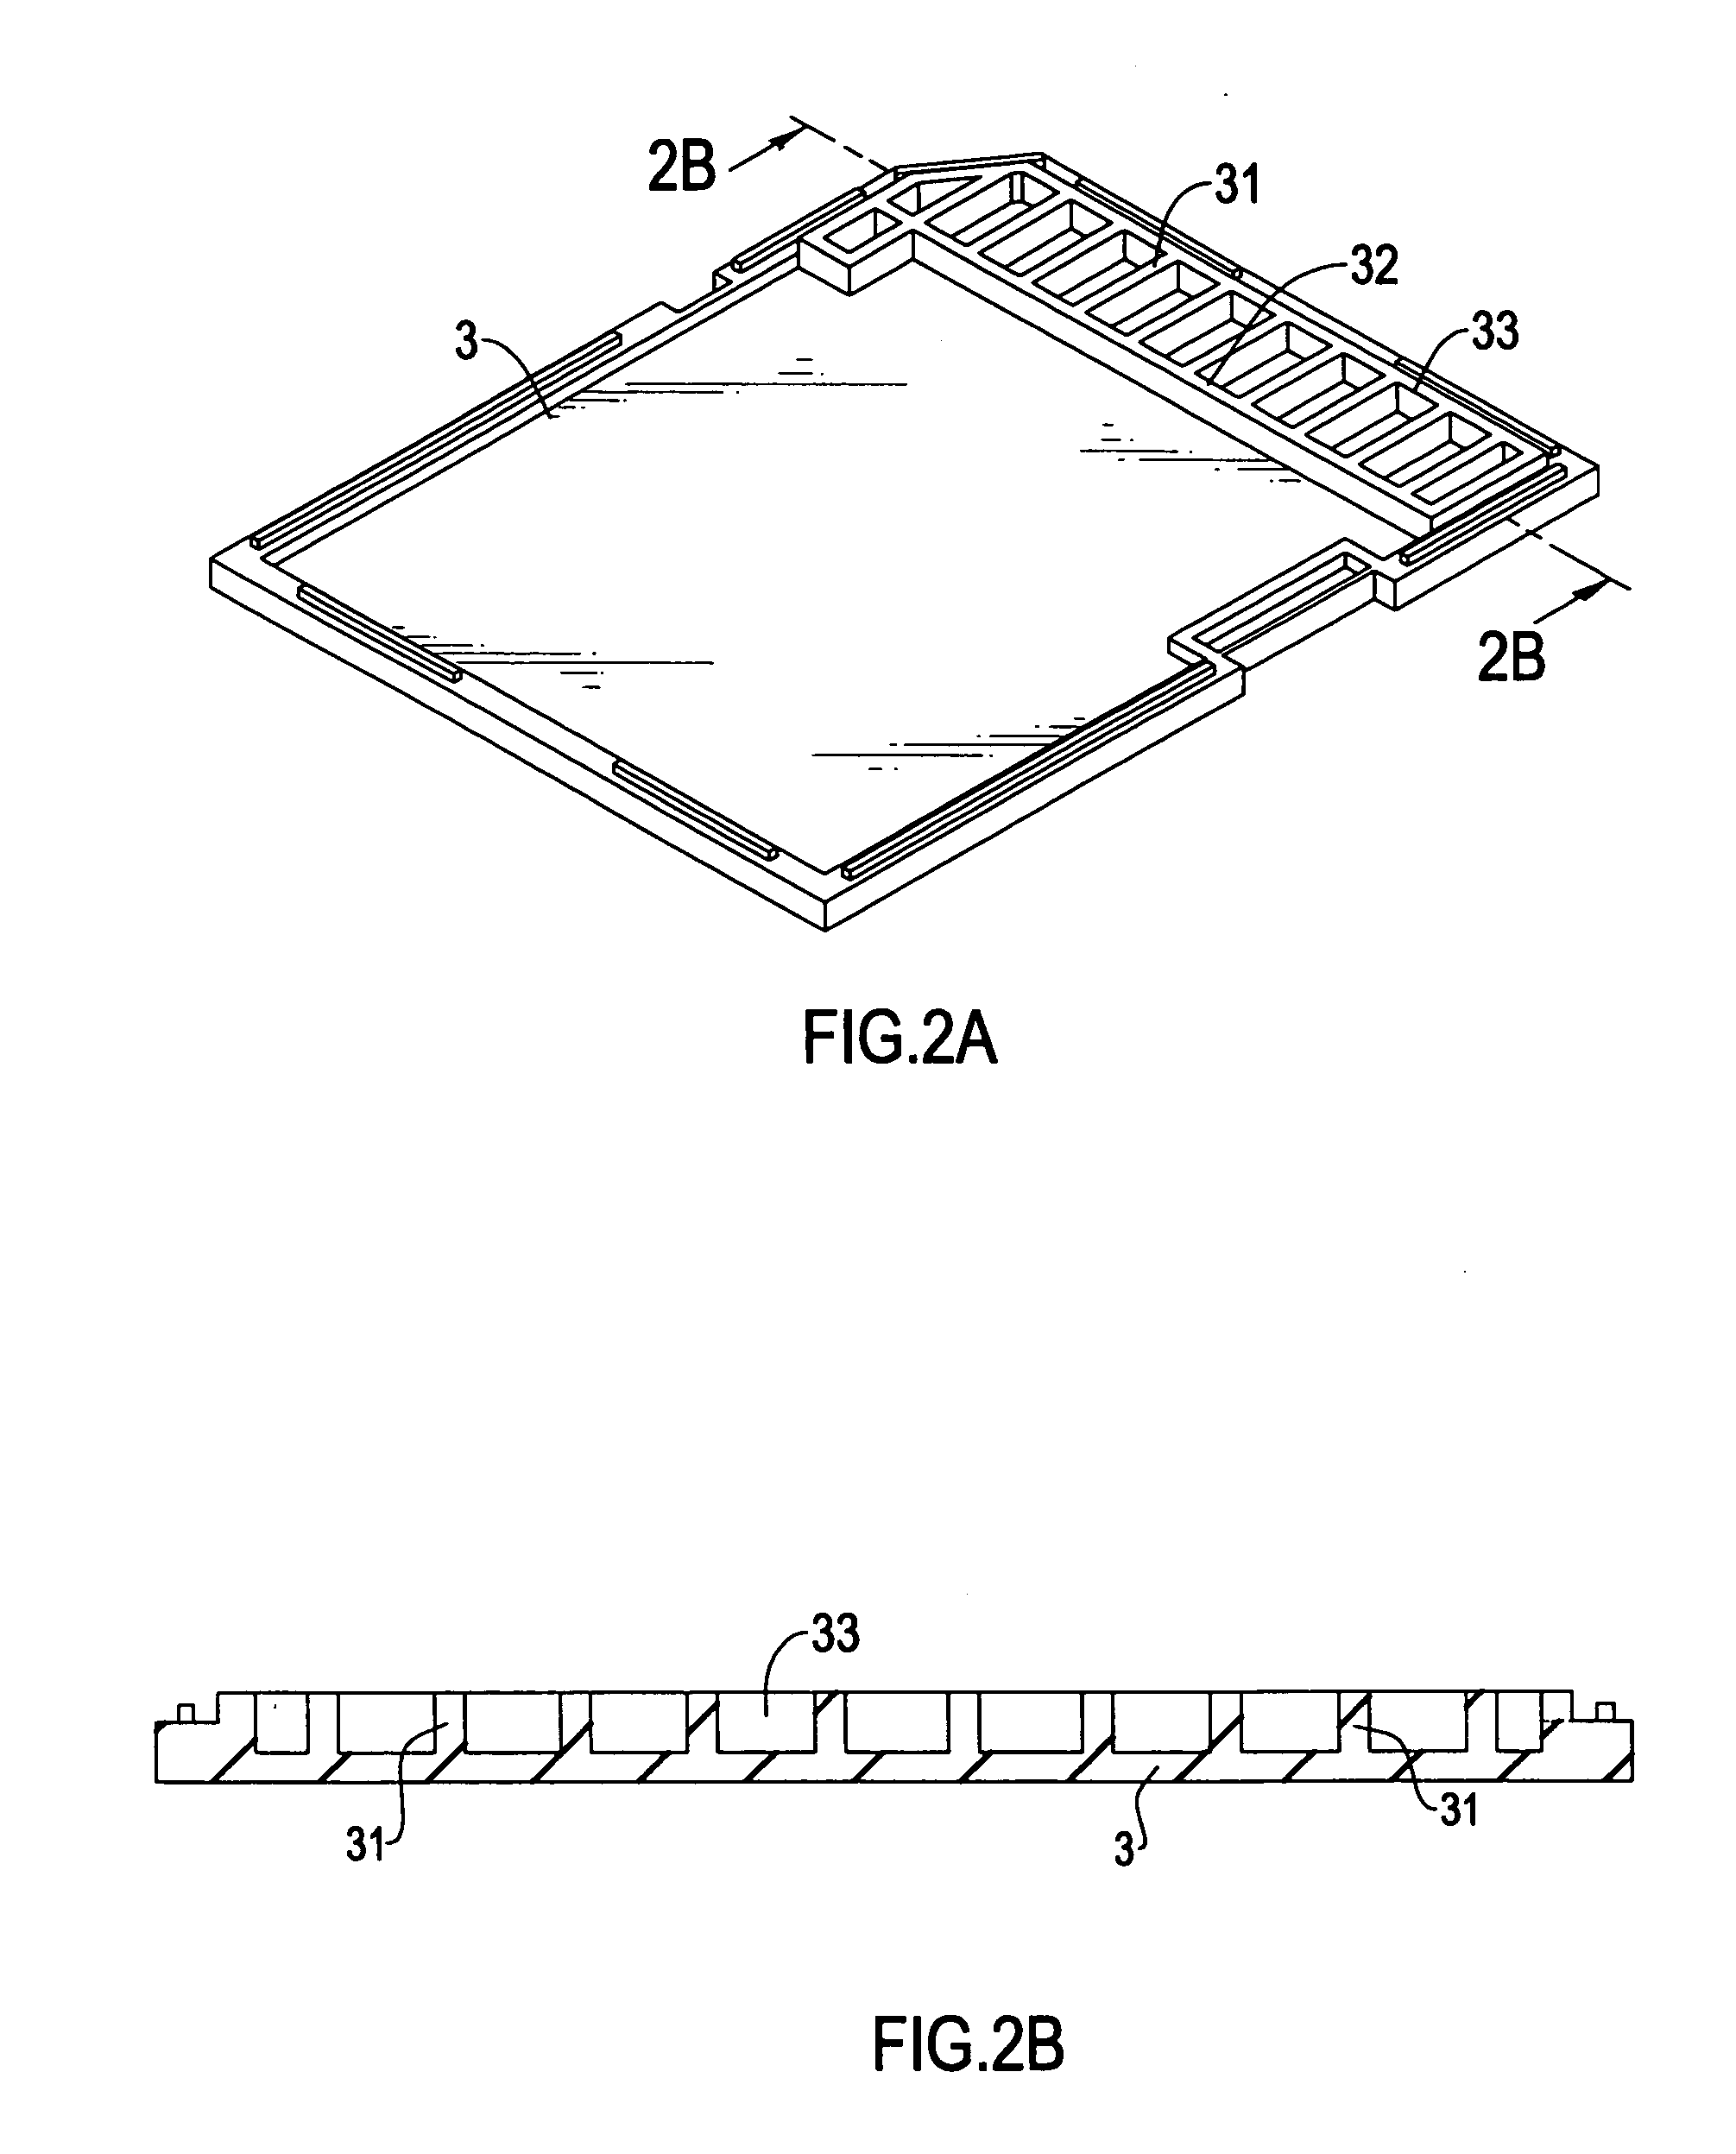 Memory card casing having longitudinally formed ridges and radially formed ribs for support of contacts of a PCB